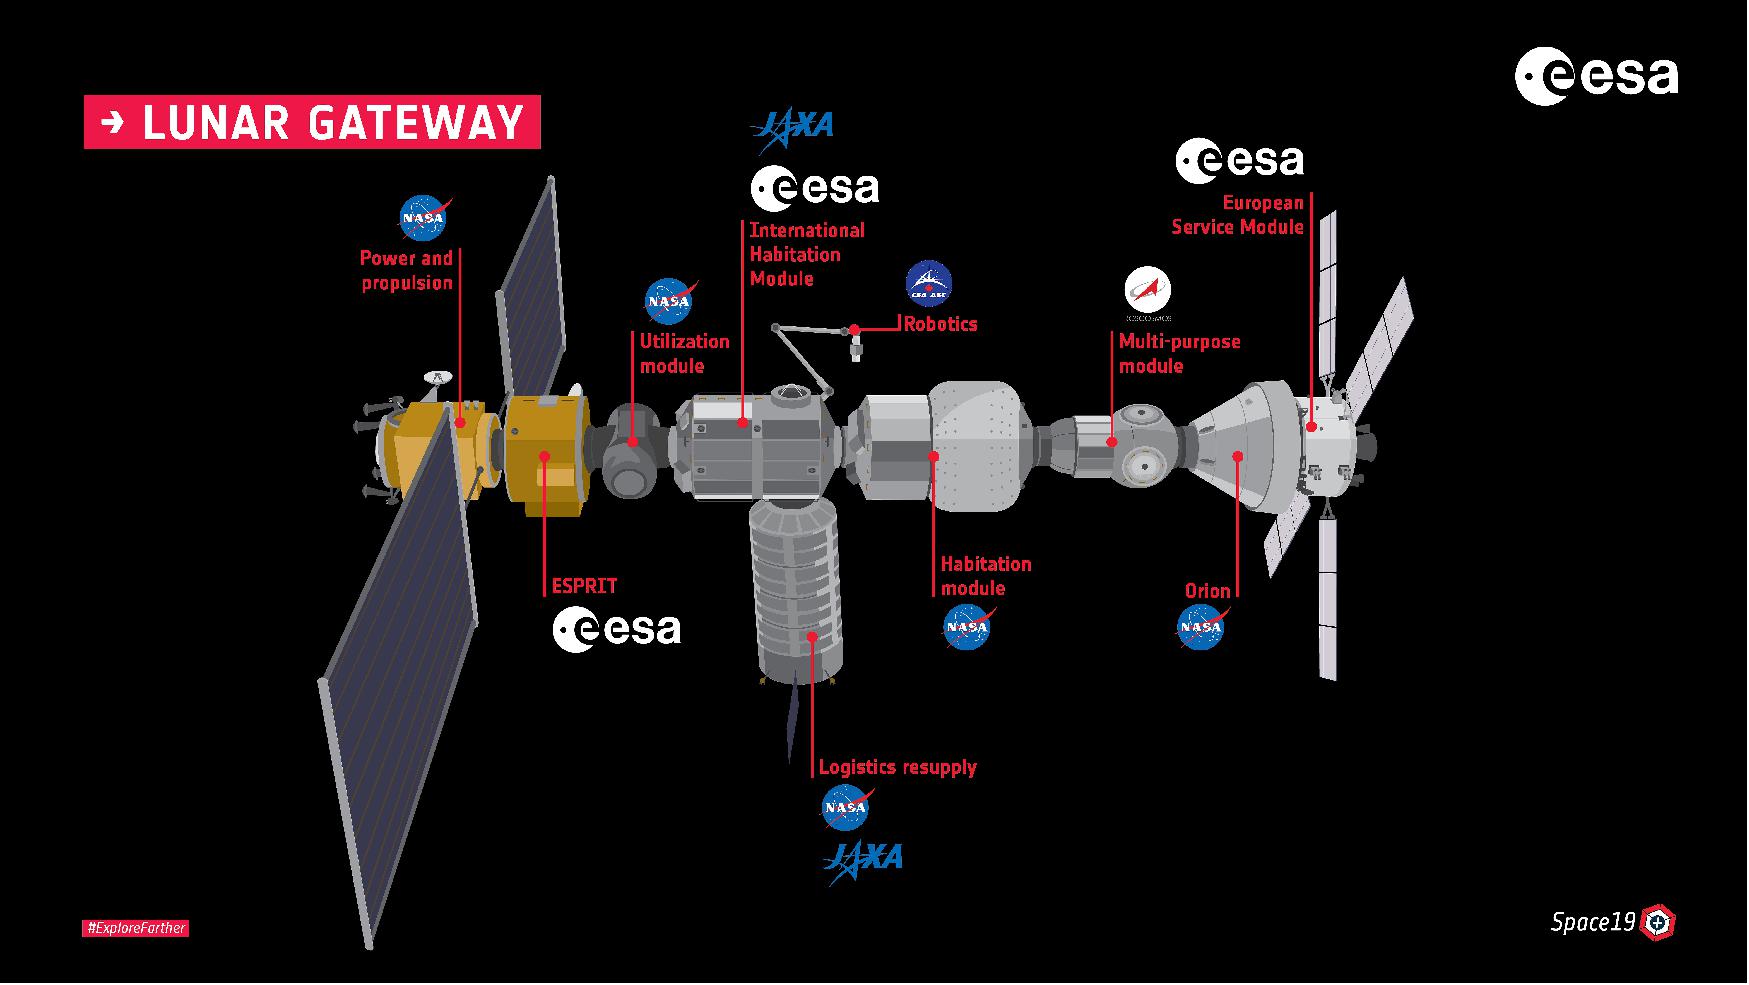 Figure 20: The space Gateway is the next structure to be launched by the partners of the International Space Station. During the 2020s, it will be assembled and operated in the vicinity of the Moon, where it will move between different orbits and enable the most distant human space missions ever attempted. Placed farther from Earth than the current Space Station – but not in a lunar orbit – the Gateway will offer a staging post for missions to the Moon and Mars. Like a mountain refuge, it will provide shelter and a place to stock up on supplies for astronauts en route to more distant destinations. It will also offer a place to relay communications and can act as a base for scientific research.- The Gateway will have a mass of around 40 tons and will consist of a service module, a communications module, a connecting module, an airlock for spacewalks, a place for the astronauts to live and an operations station to command the gateway's robotic arm or rovers on the Moon. Astronauts will be able to occupy it for up to 90 days at a time (image credit: NASA/ESA)